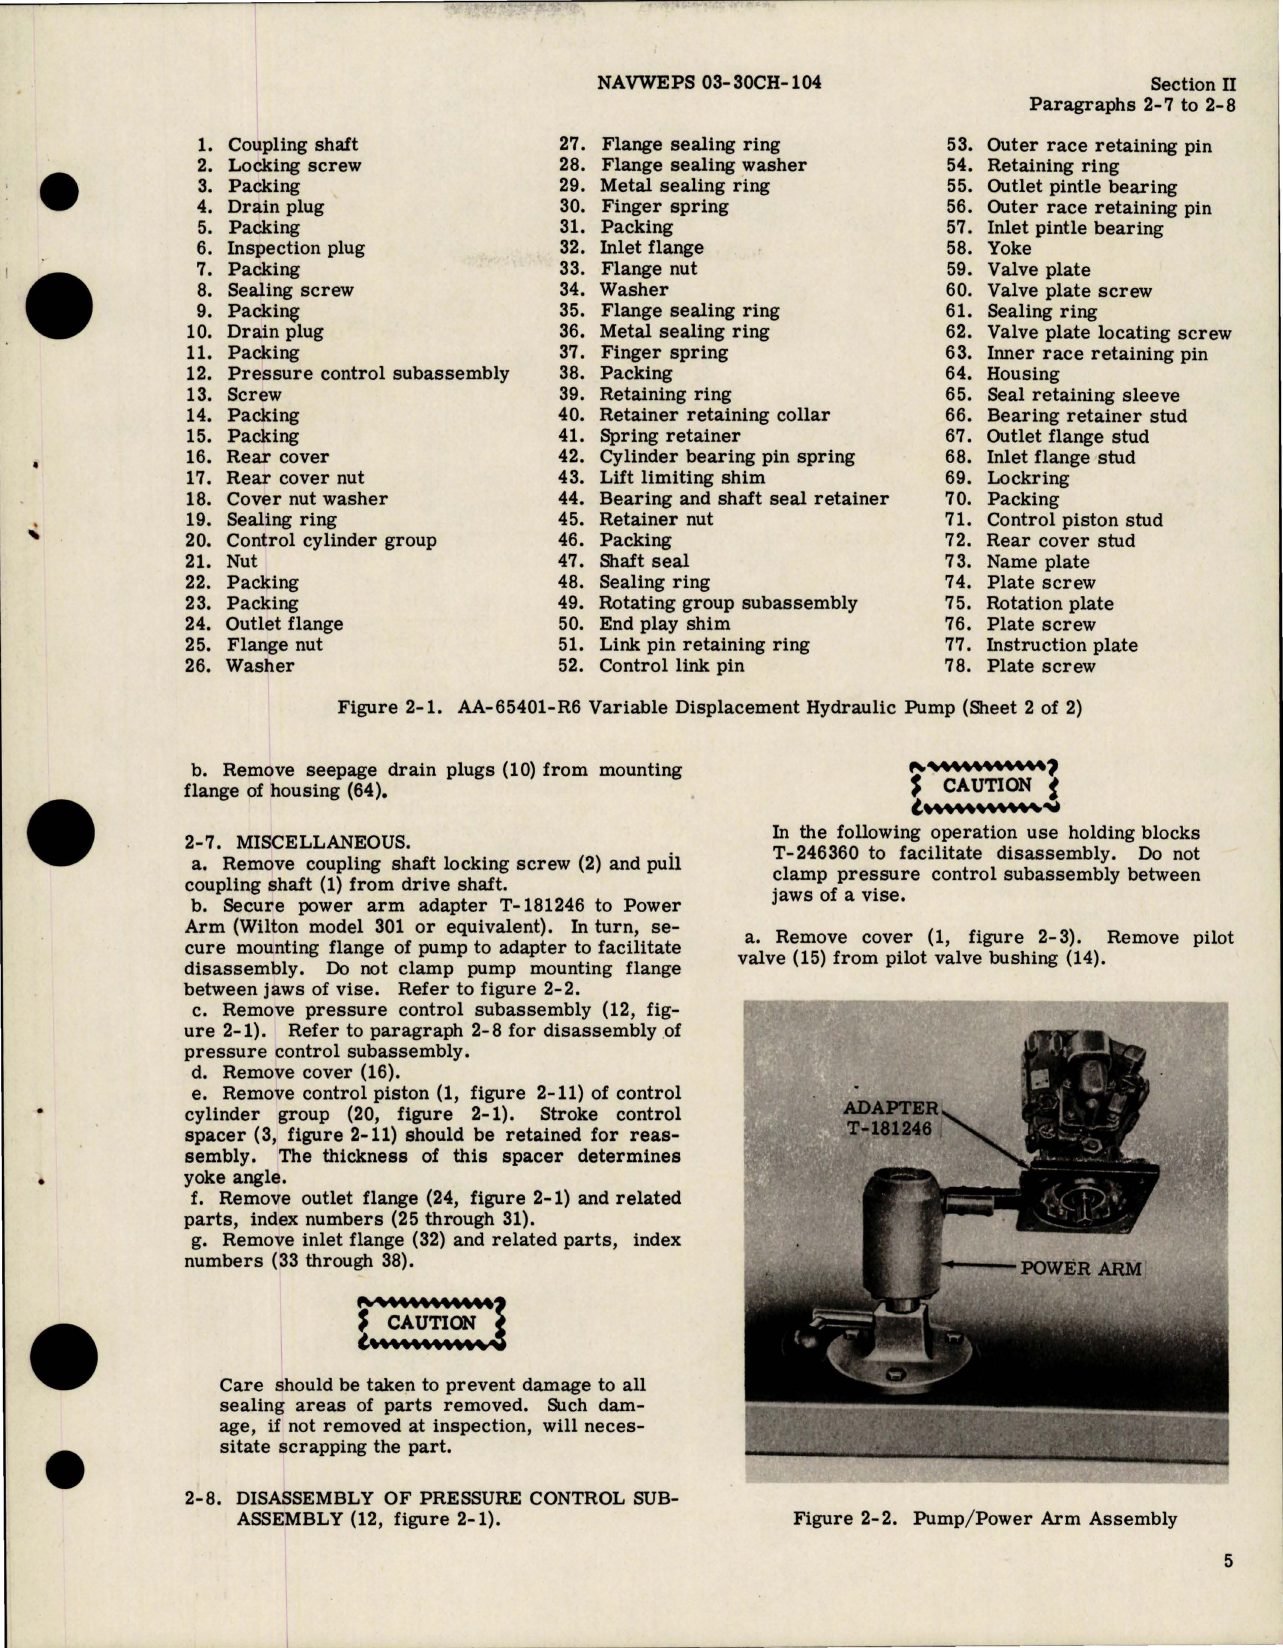 Sample page 9 from AirCorps Library document: Overhaul Instructions for Hydraulic Pump Assembly - Models AA-60401-R6 and AA-65401-R6 